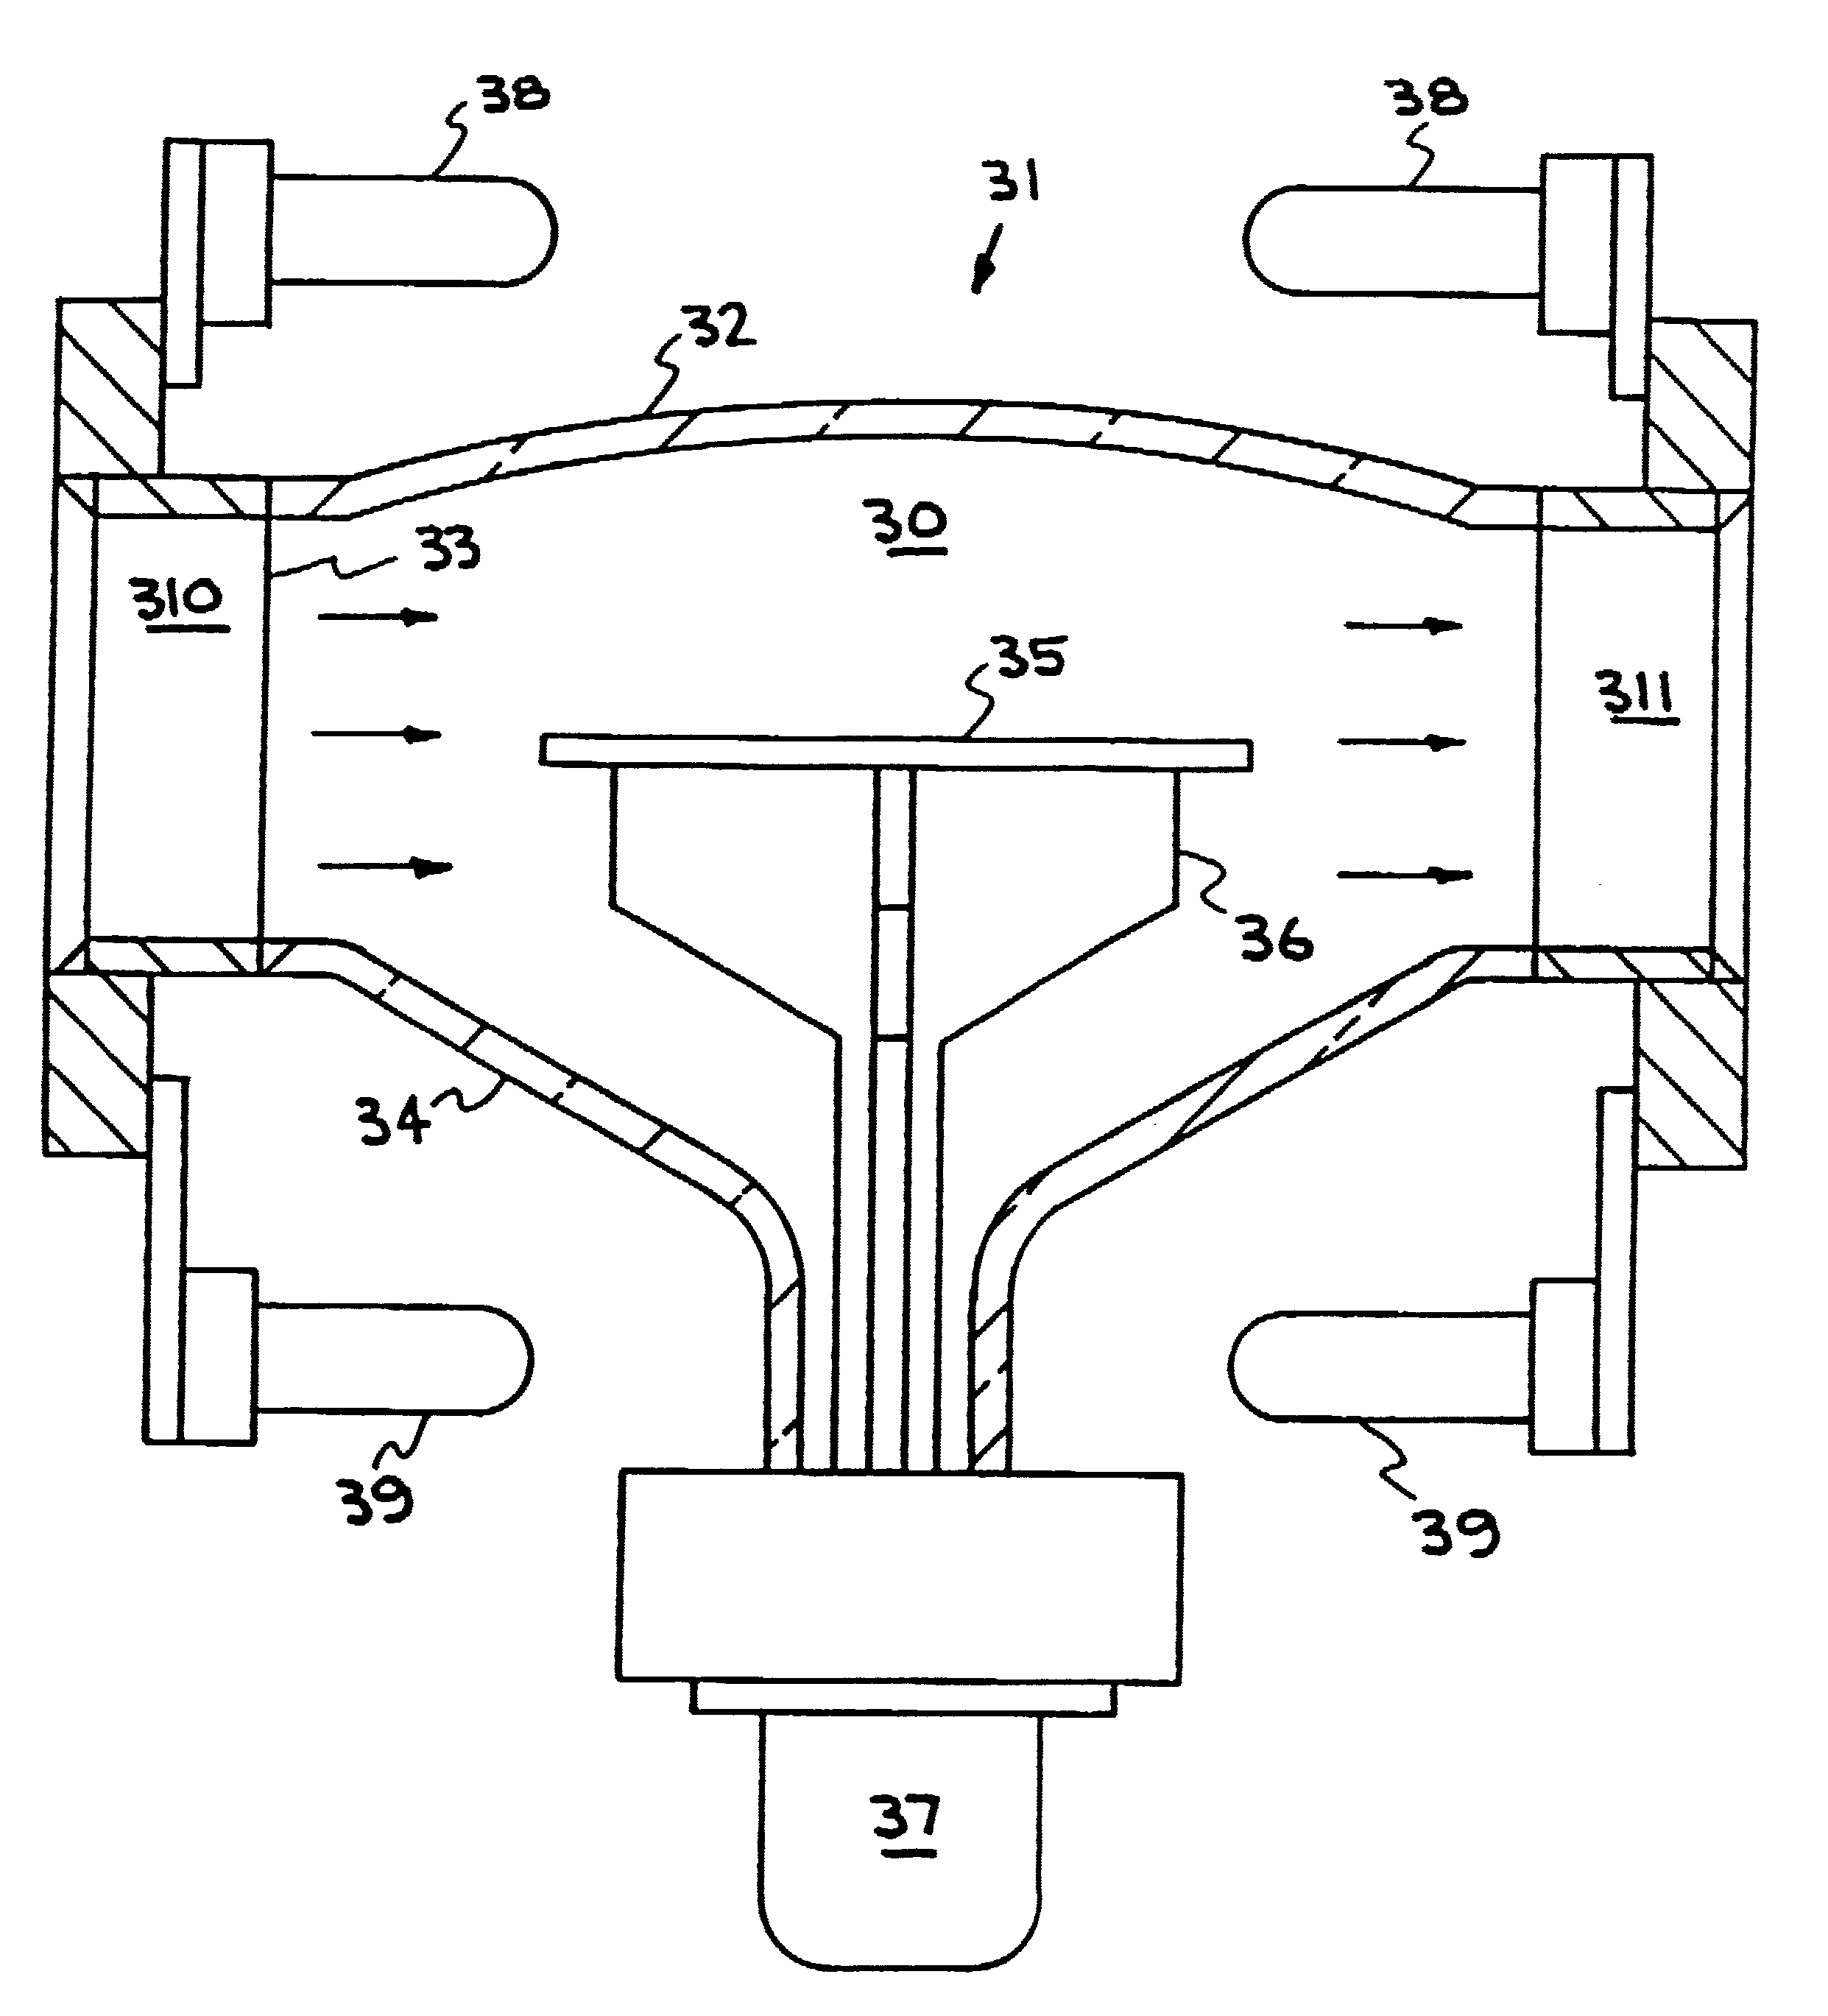 In situ method for cleaning silicon surface and forming layer thereon in same chamber